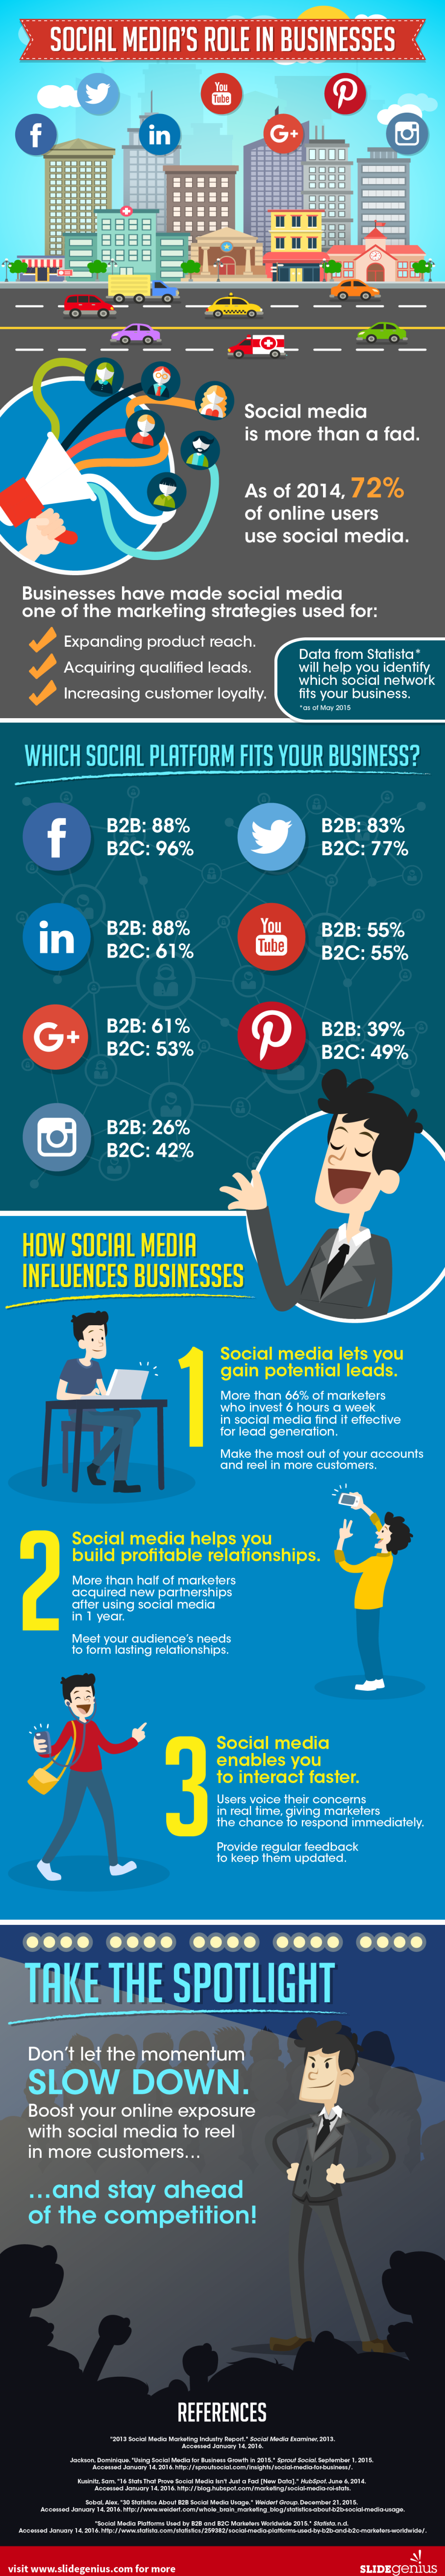 Social Media’s Role in Businesses